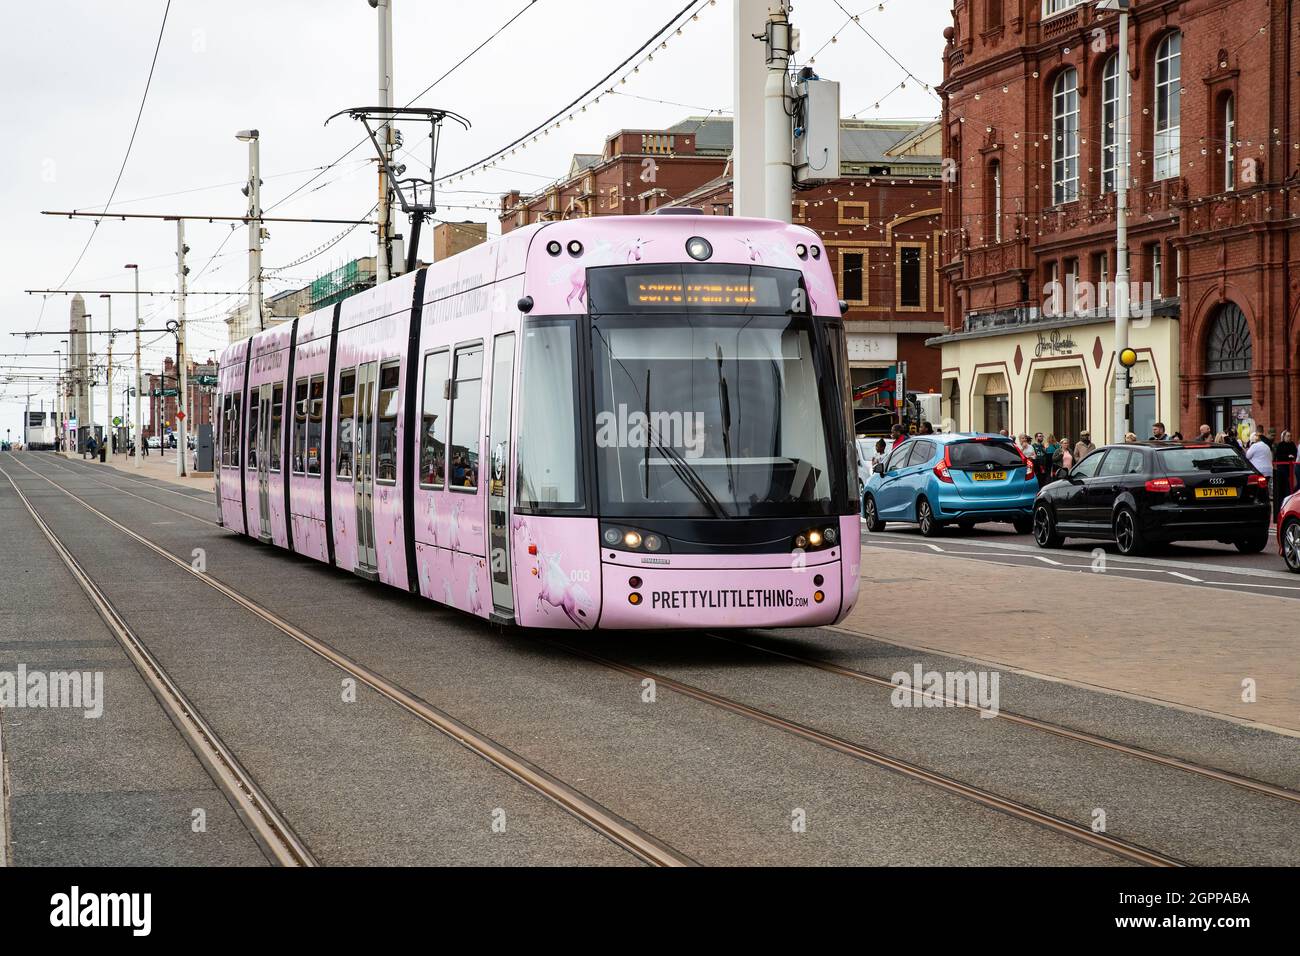 Bombardier Flexity 2 tram 003 in the Pink livery of the 'Pretty Little Thing' clothing store on Blackpool's seaside resort promenade on UK West coast Stock Photo